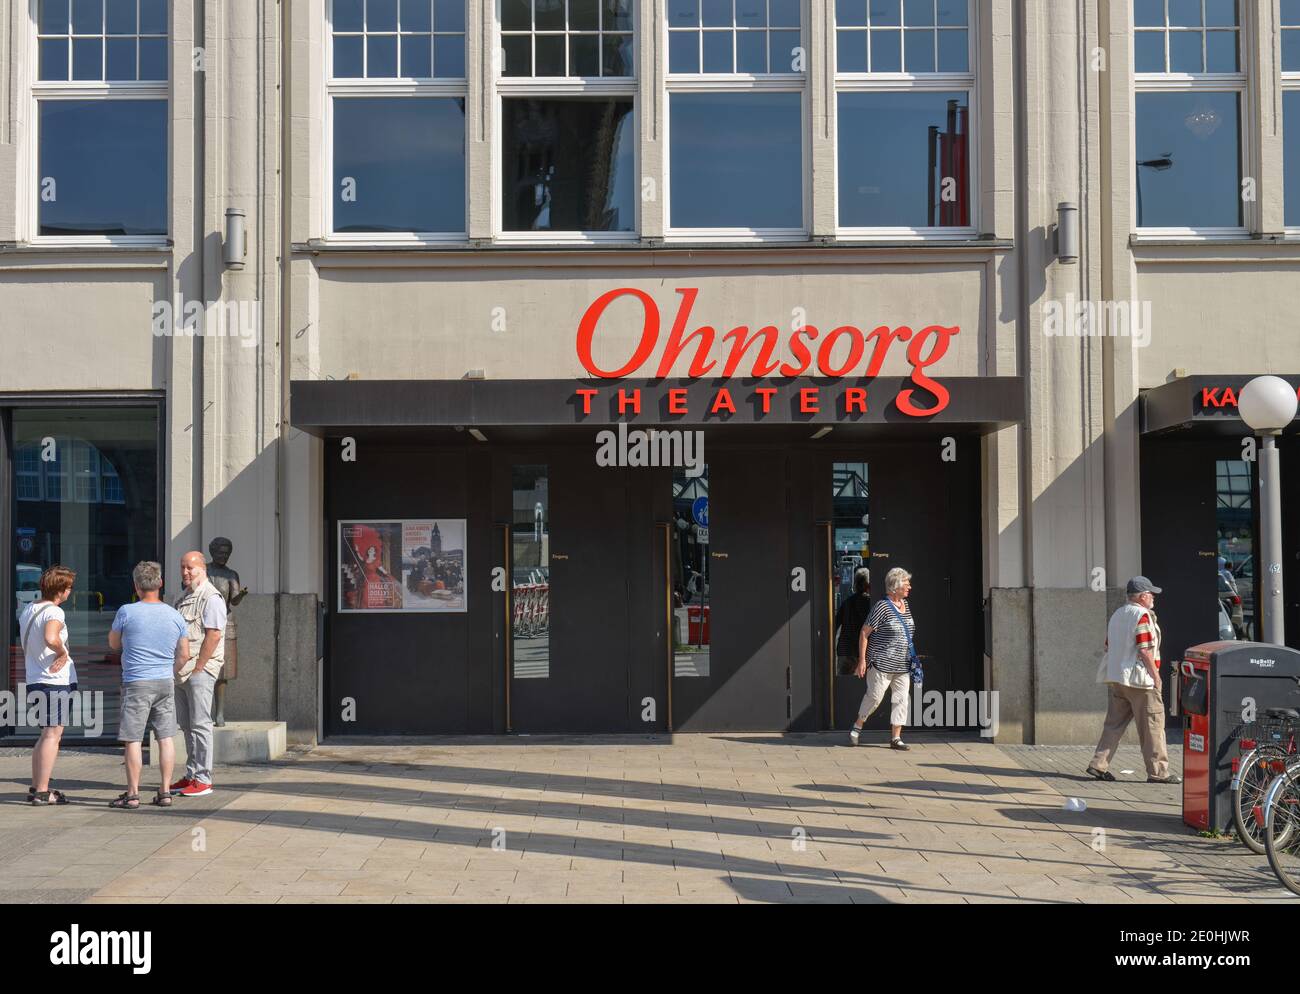 Ohnsorg theater High Resolution Stock Photography and Images - Alamy